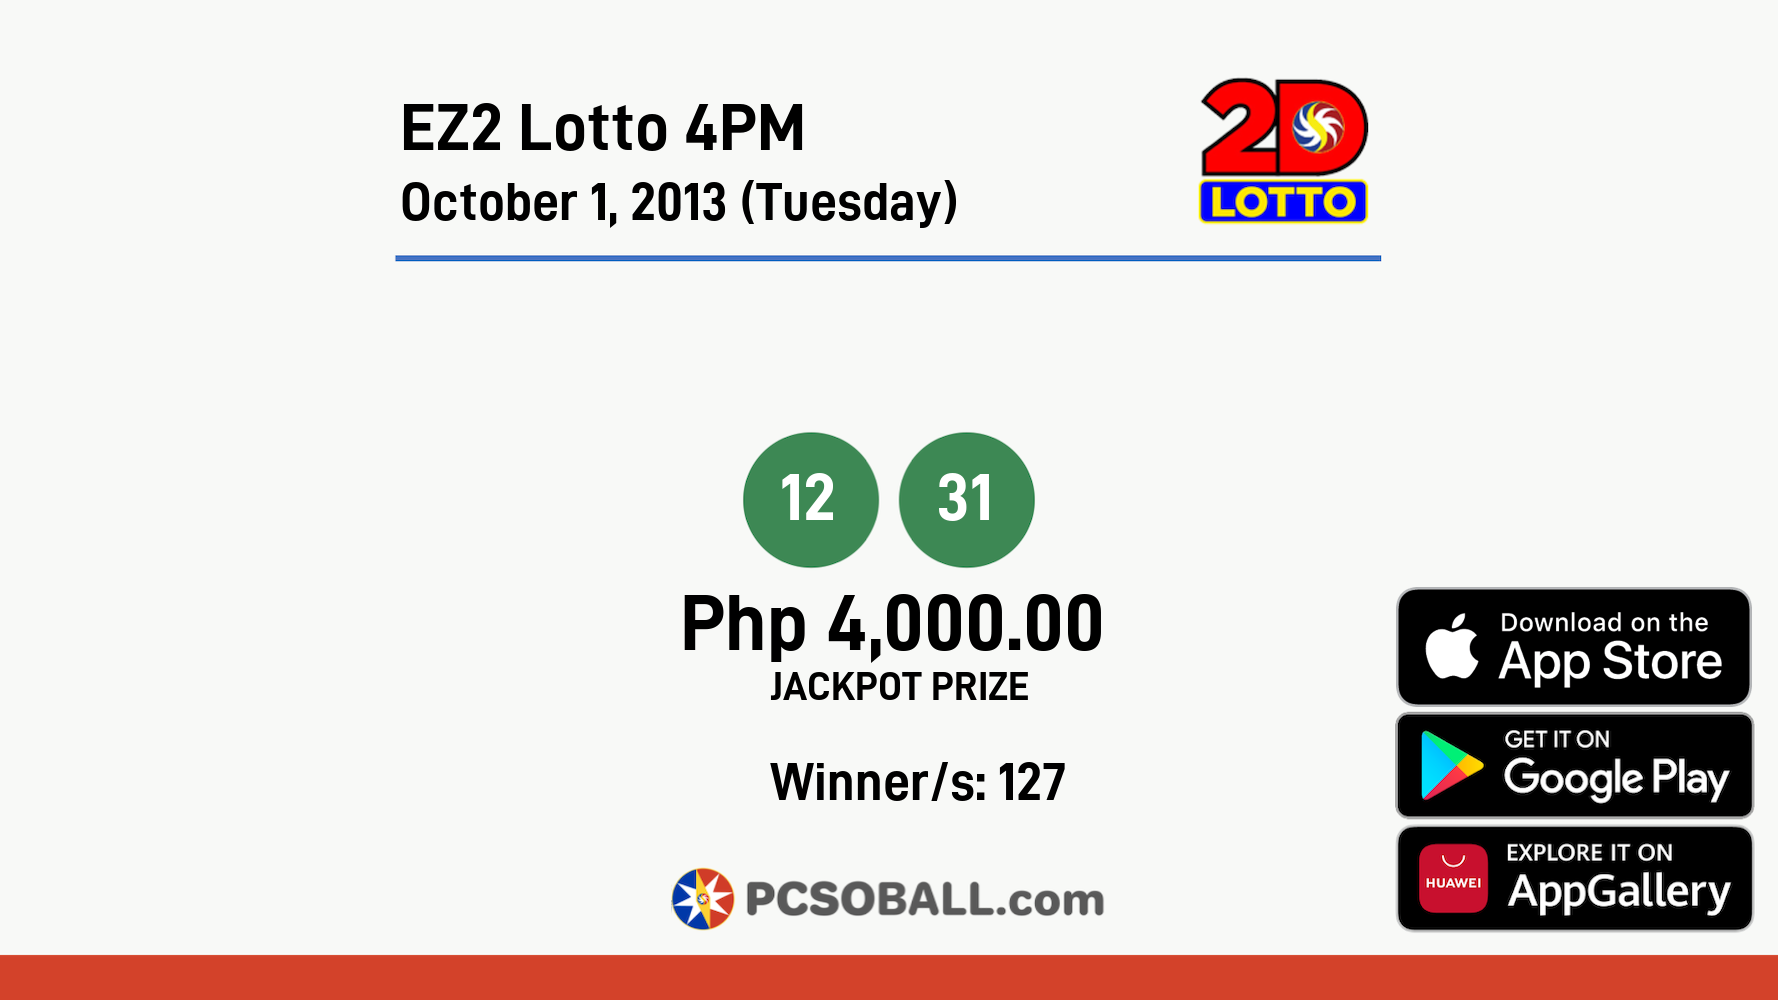 EZ2 Lotto 4PM October 1, 2013 (Tuesday) Result